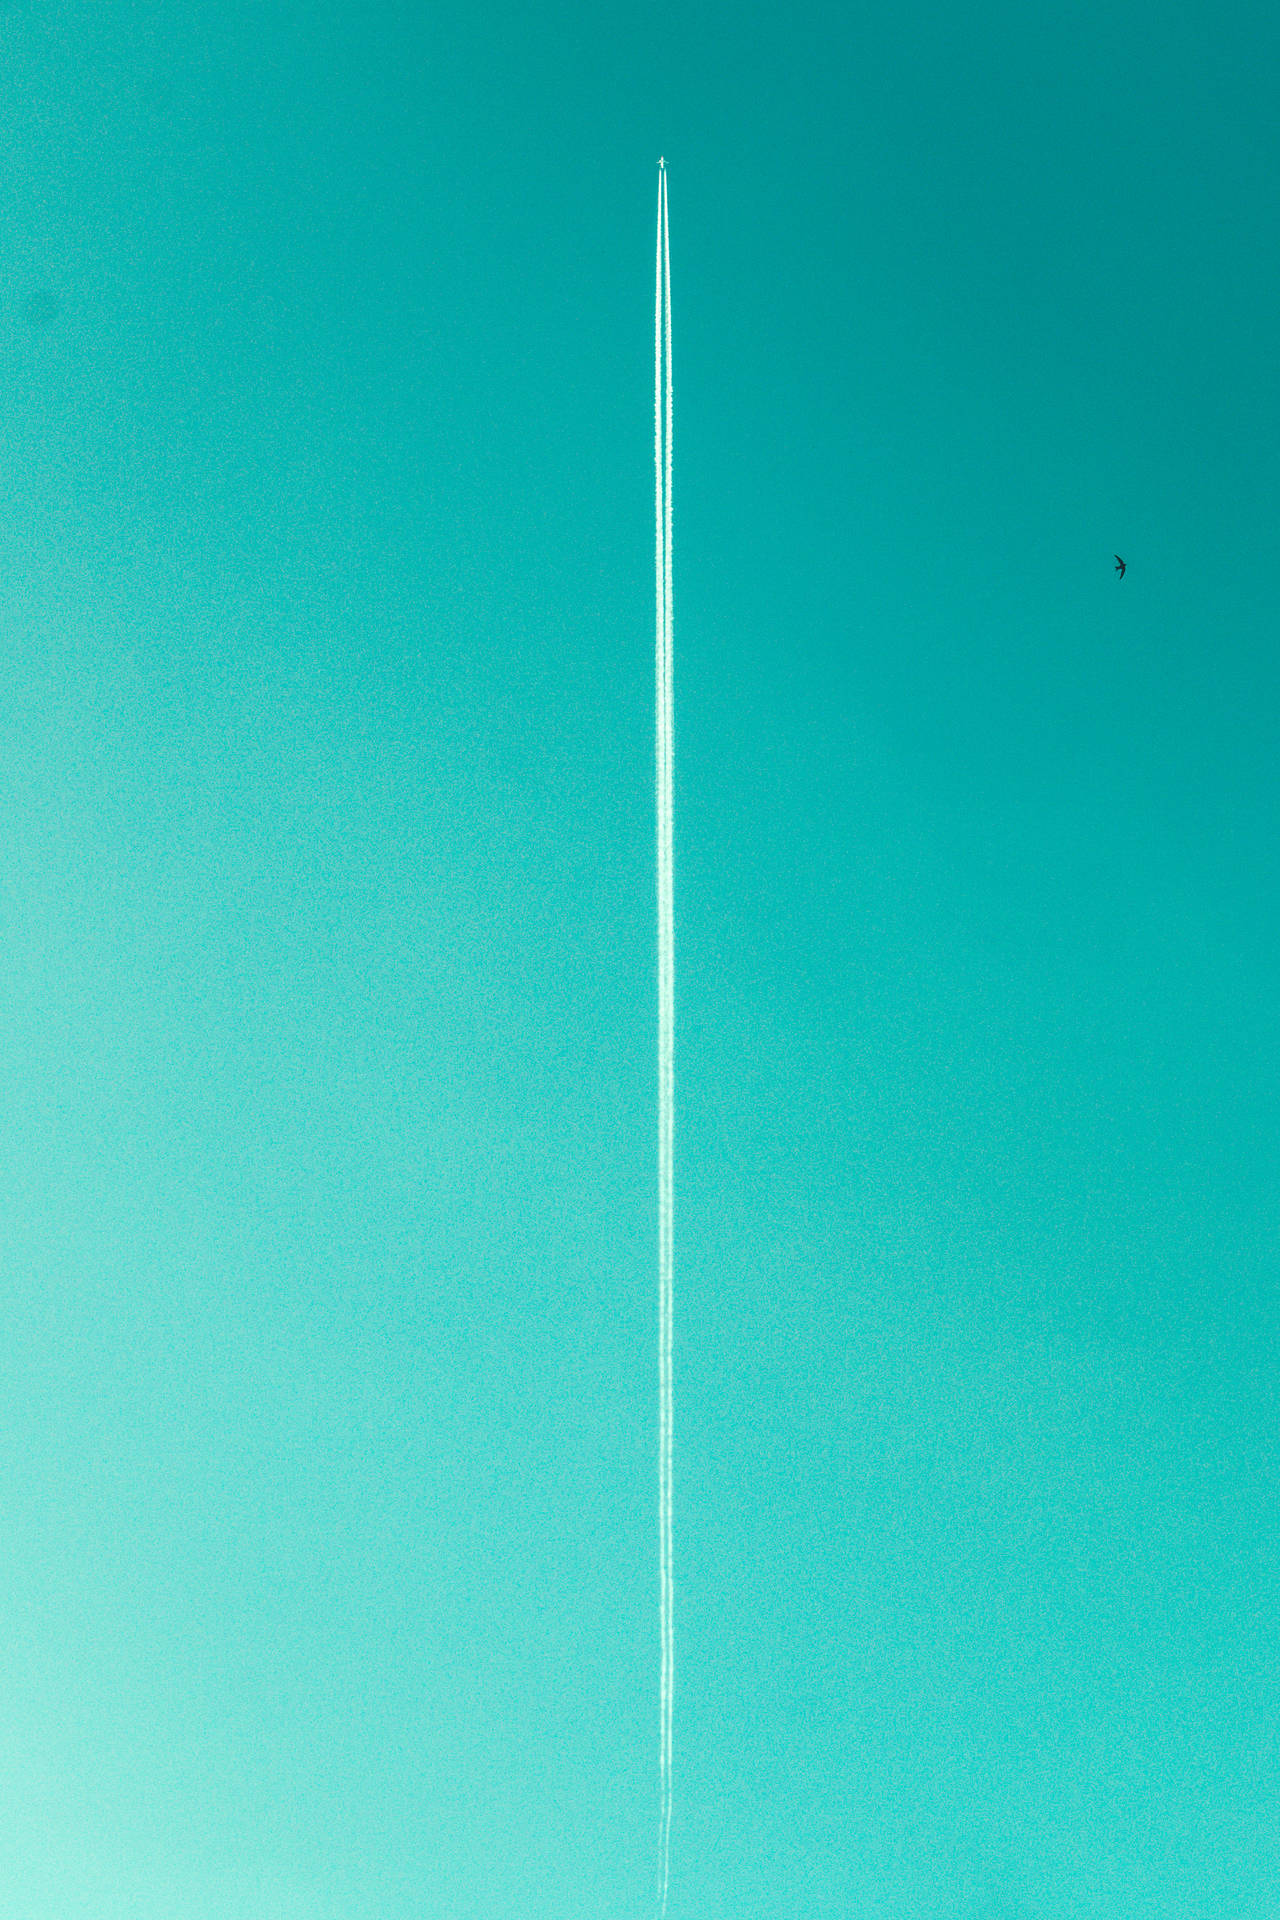 3515X5272 Minimal Wallpaper and Background